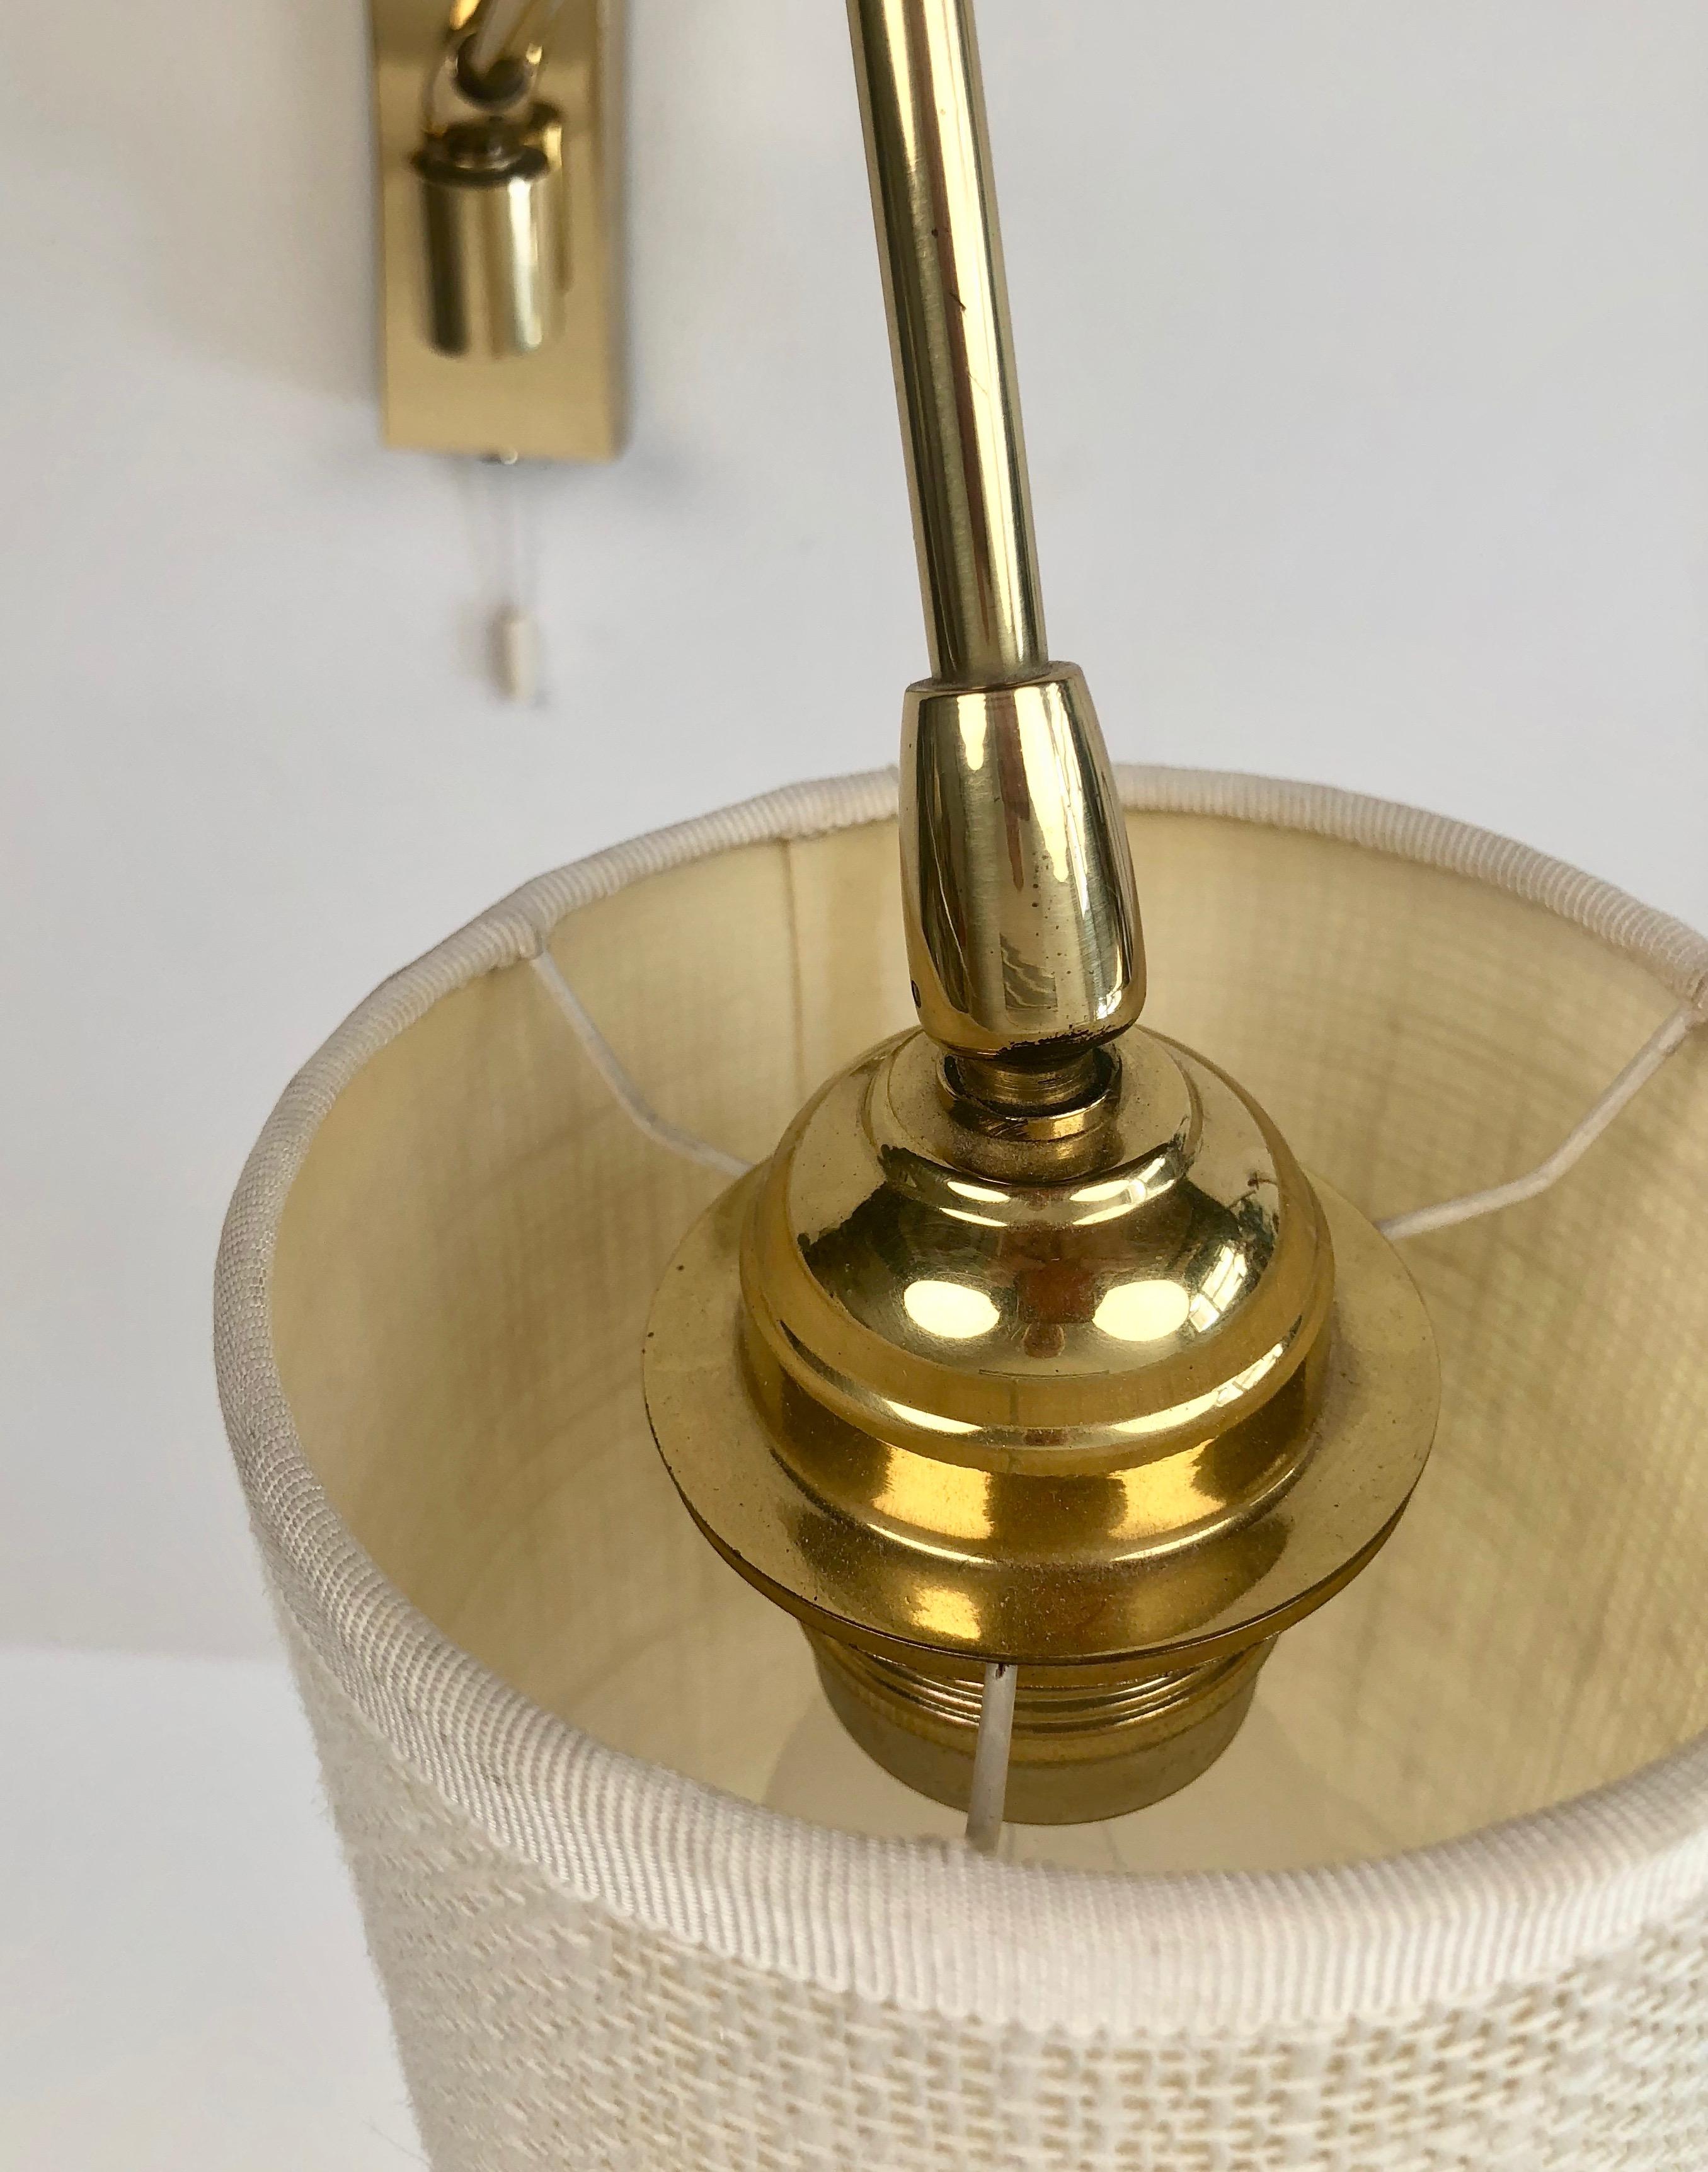 Mid-20th Century Adjustable Wall Light in Brass with Linen Shade 1960, Austria